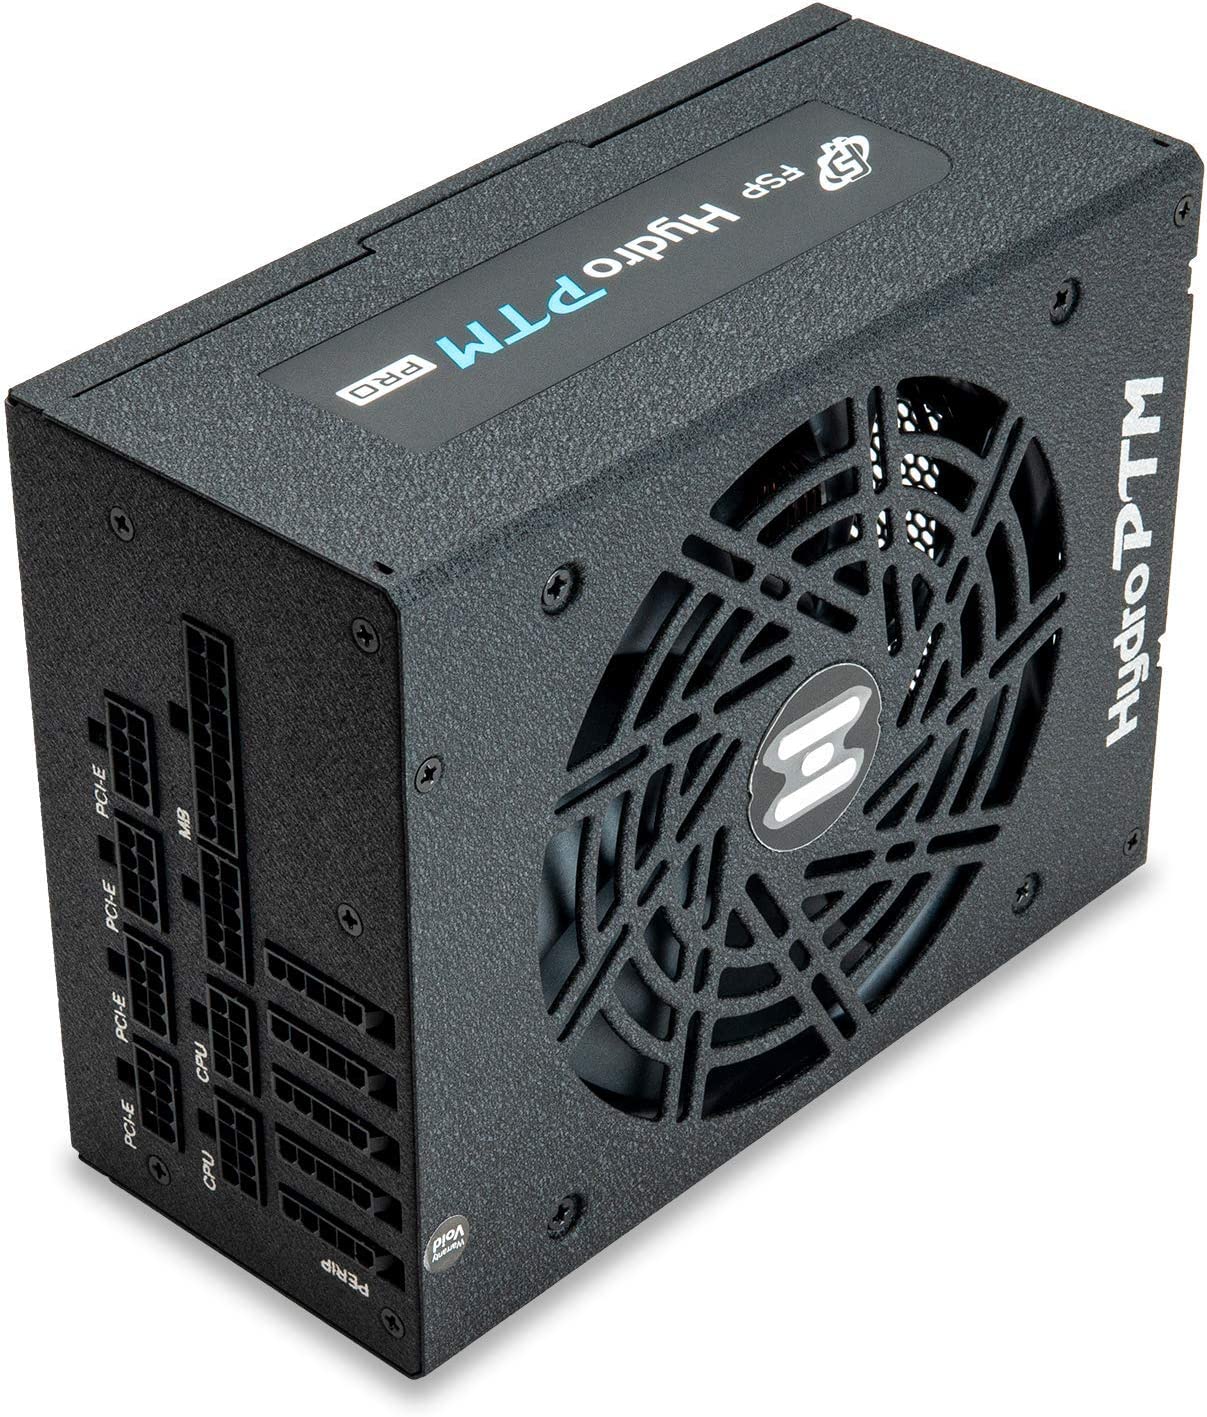  FSP Hydro PTM PRO 1200w, 80 Plus Platinum, ATX 3.0 (PCIe 5.0) support, Japanese Capacitor, Full Modular. 10 Year Warranty  